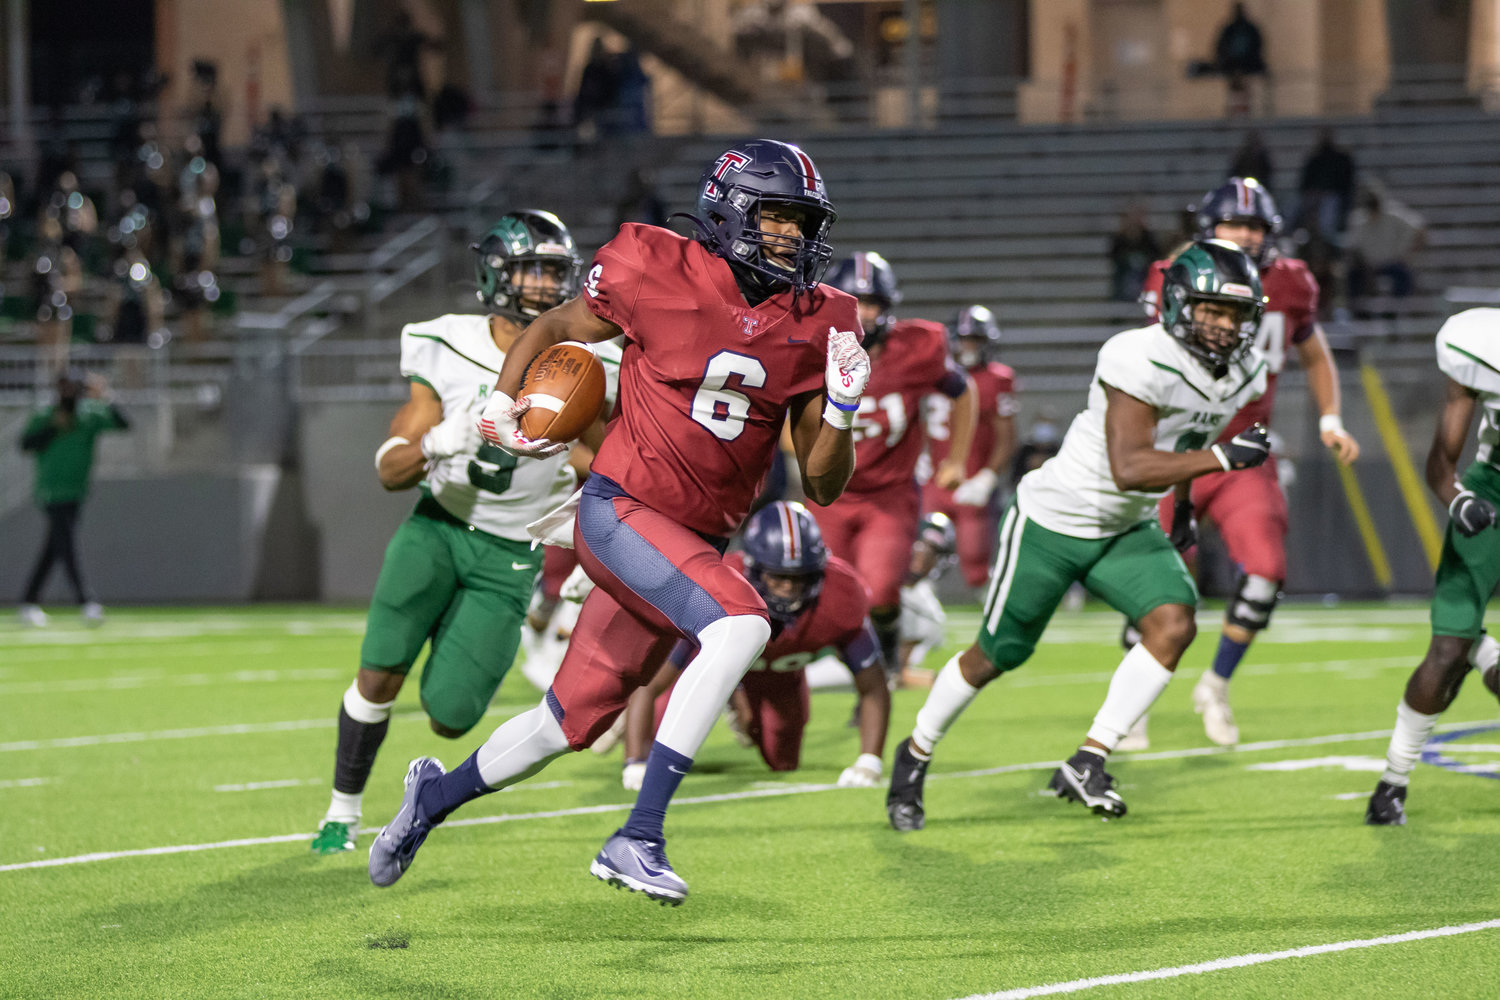 Tompkins running back Marquis Shoulders runs for a touchdown during the Falcons' win over Mayde Creek on Thursday evening at Legacy Stadium.